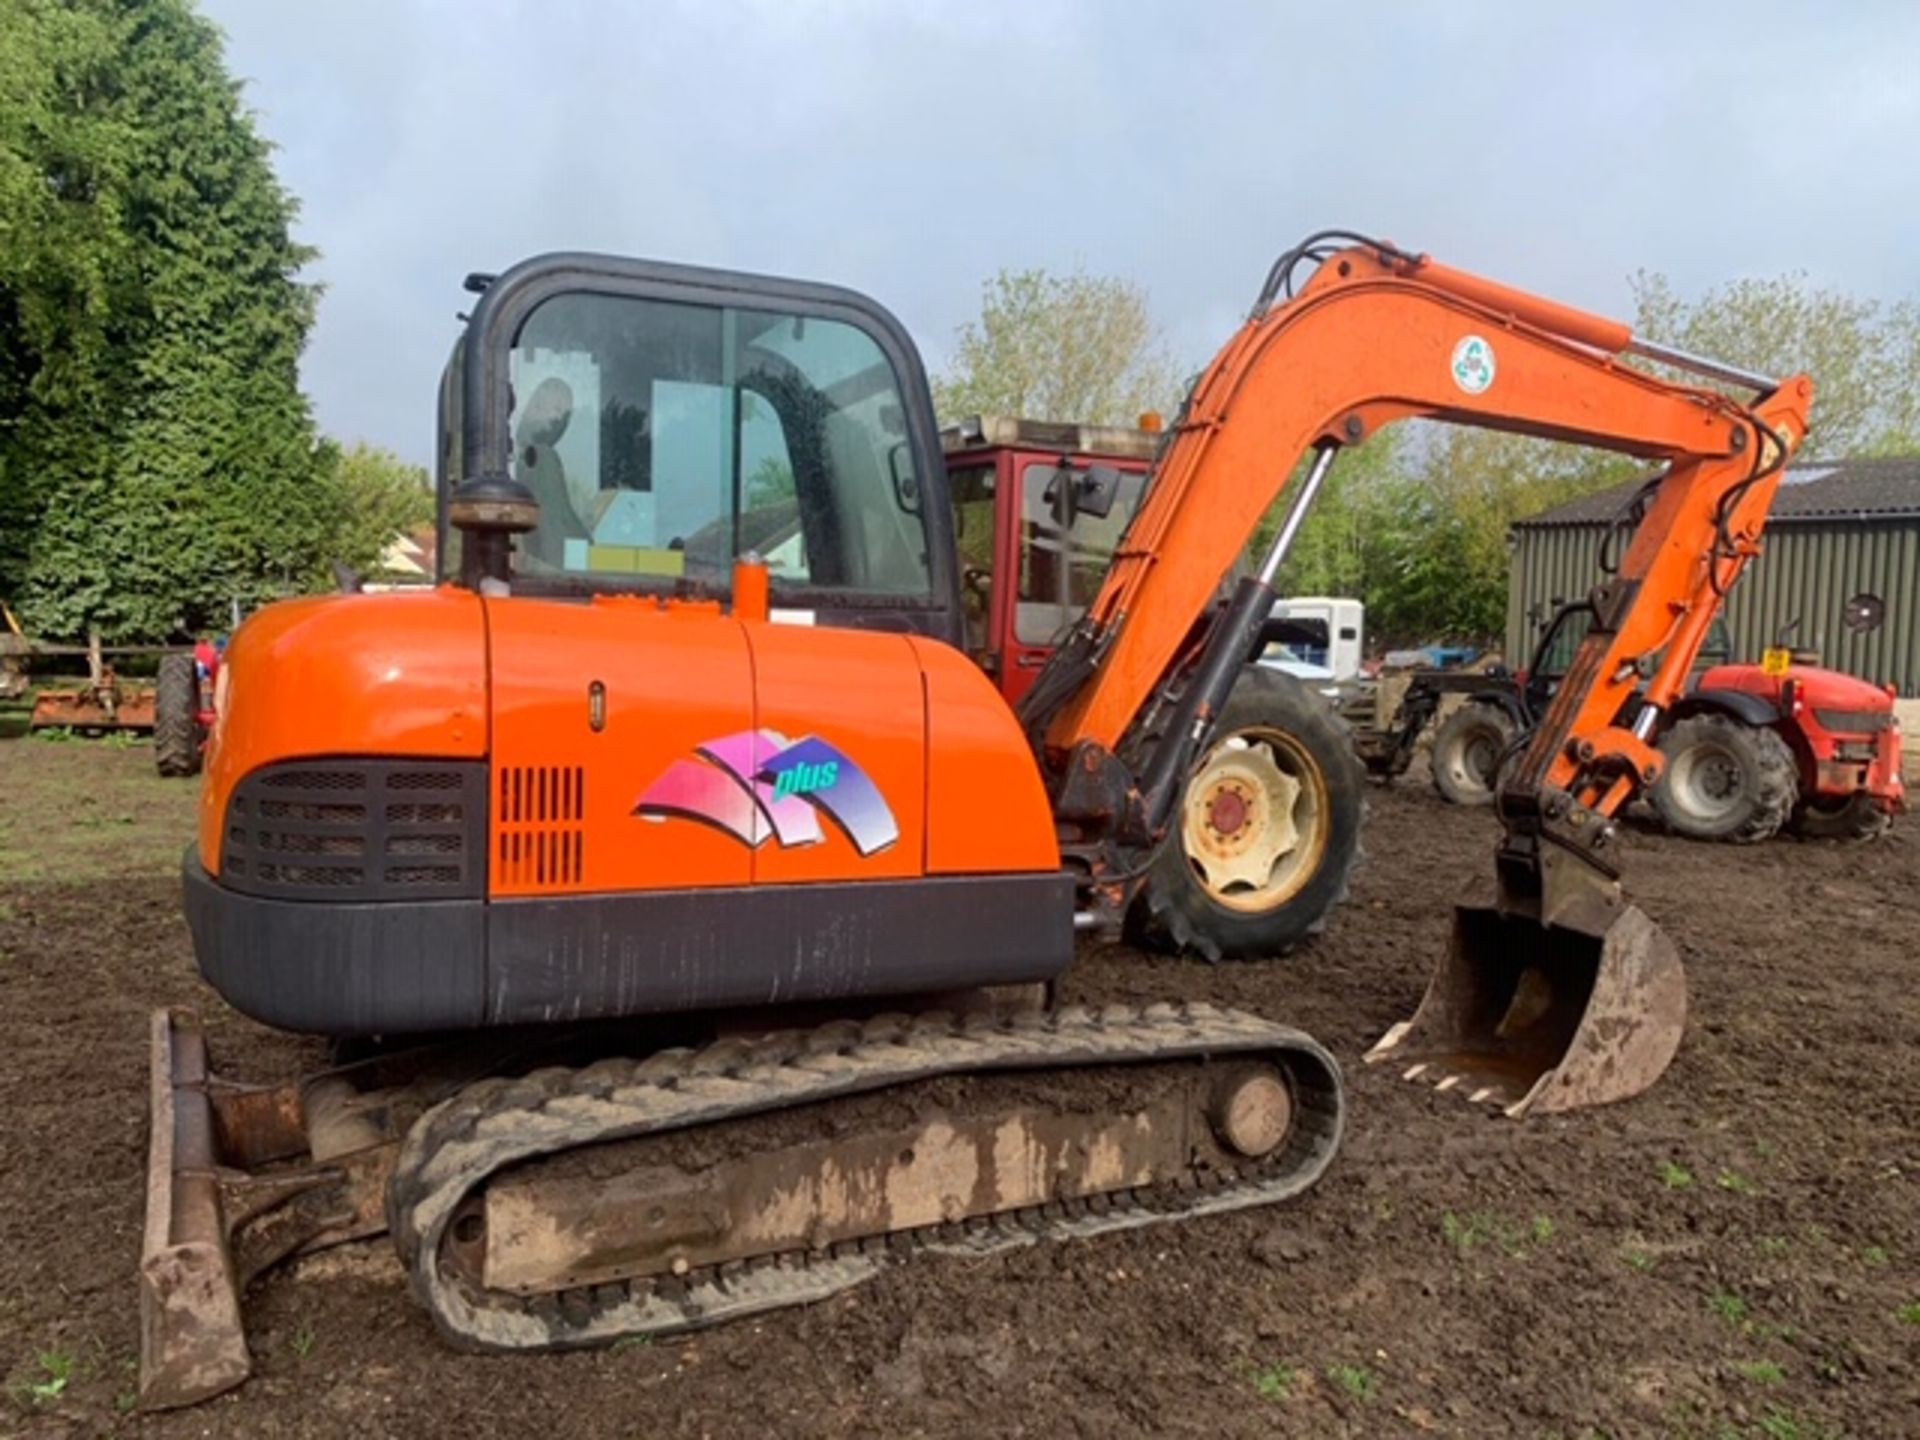 DAEWOO 55PLUS 5.5 TONNE RUBBER TRACKED EXCAVATOR. SUPPLIED WITH 3 BUCKETS AND QUICK HITCH. HOUR